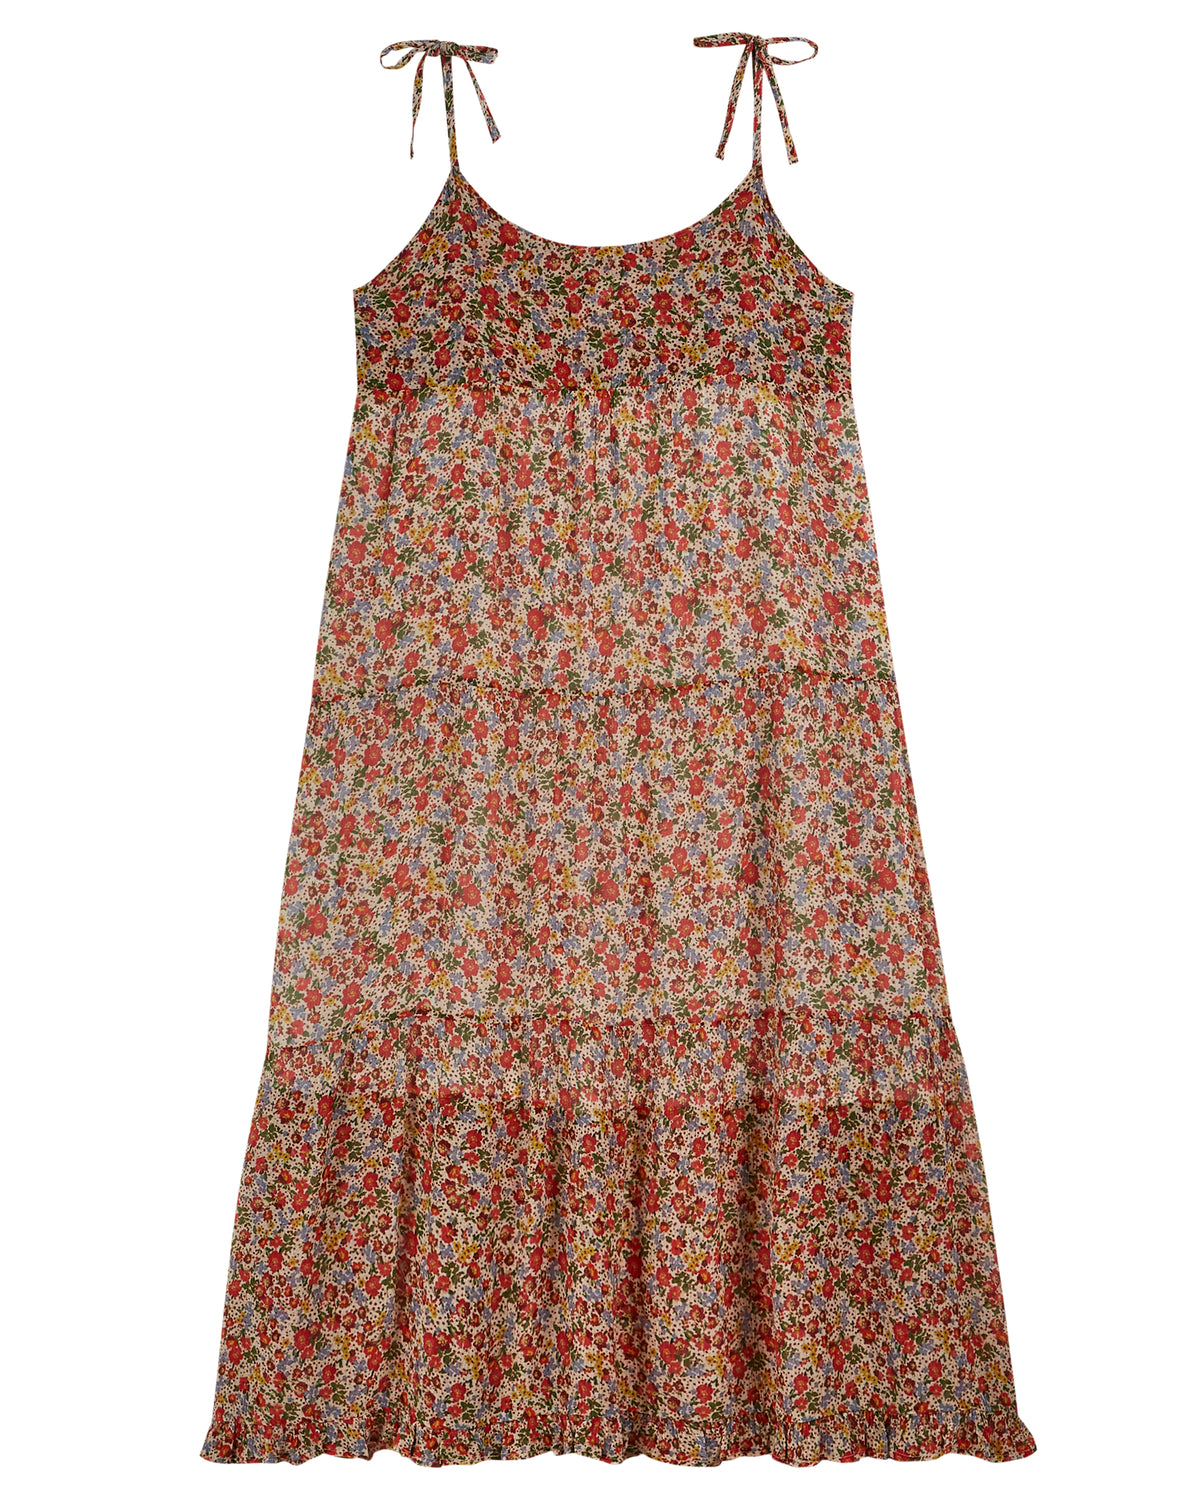 Tiered ditsy floral summer dress